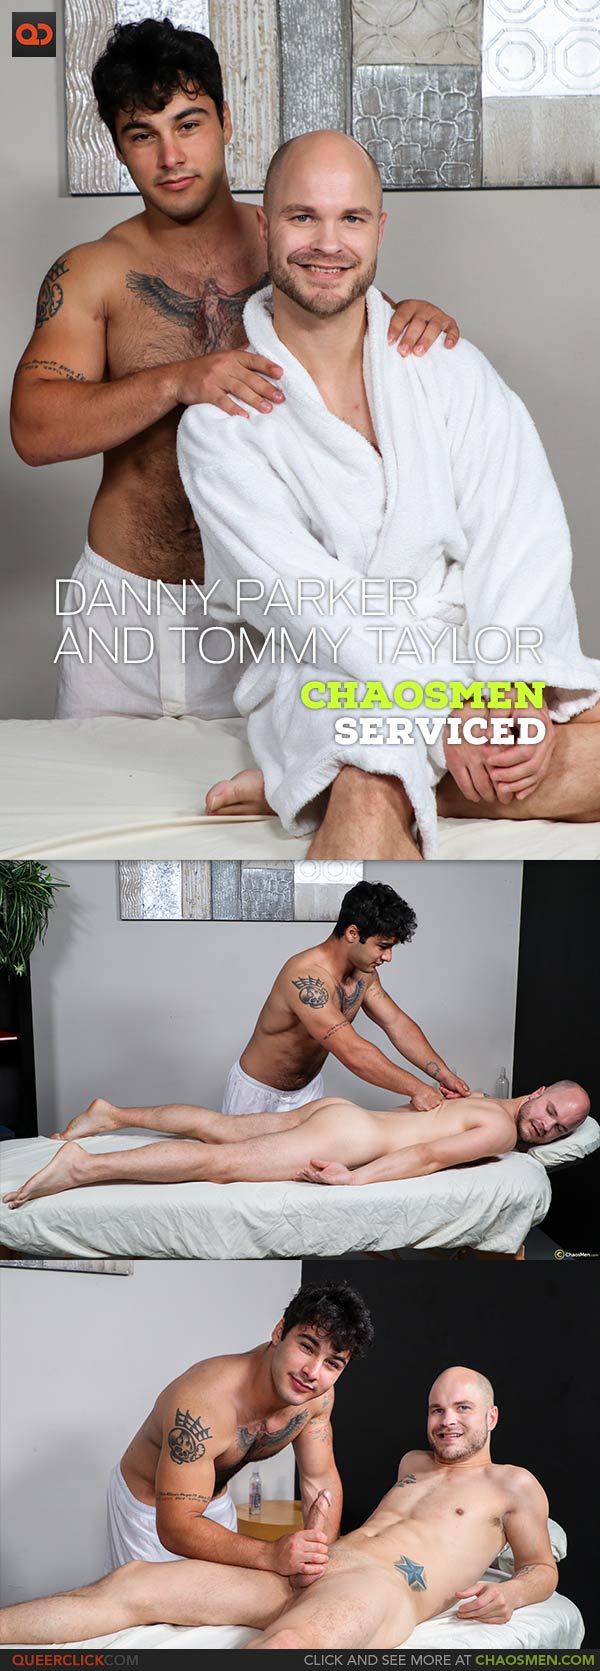 ChaosMen: Danny Parker and Tommy Taylor - Serviced